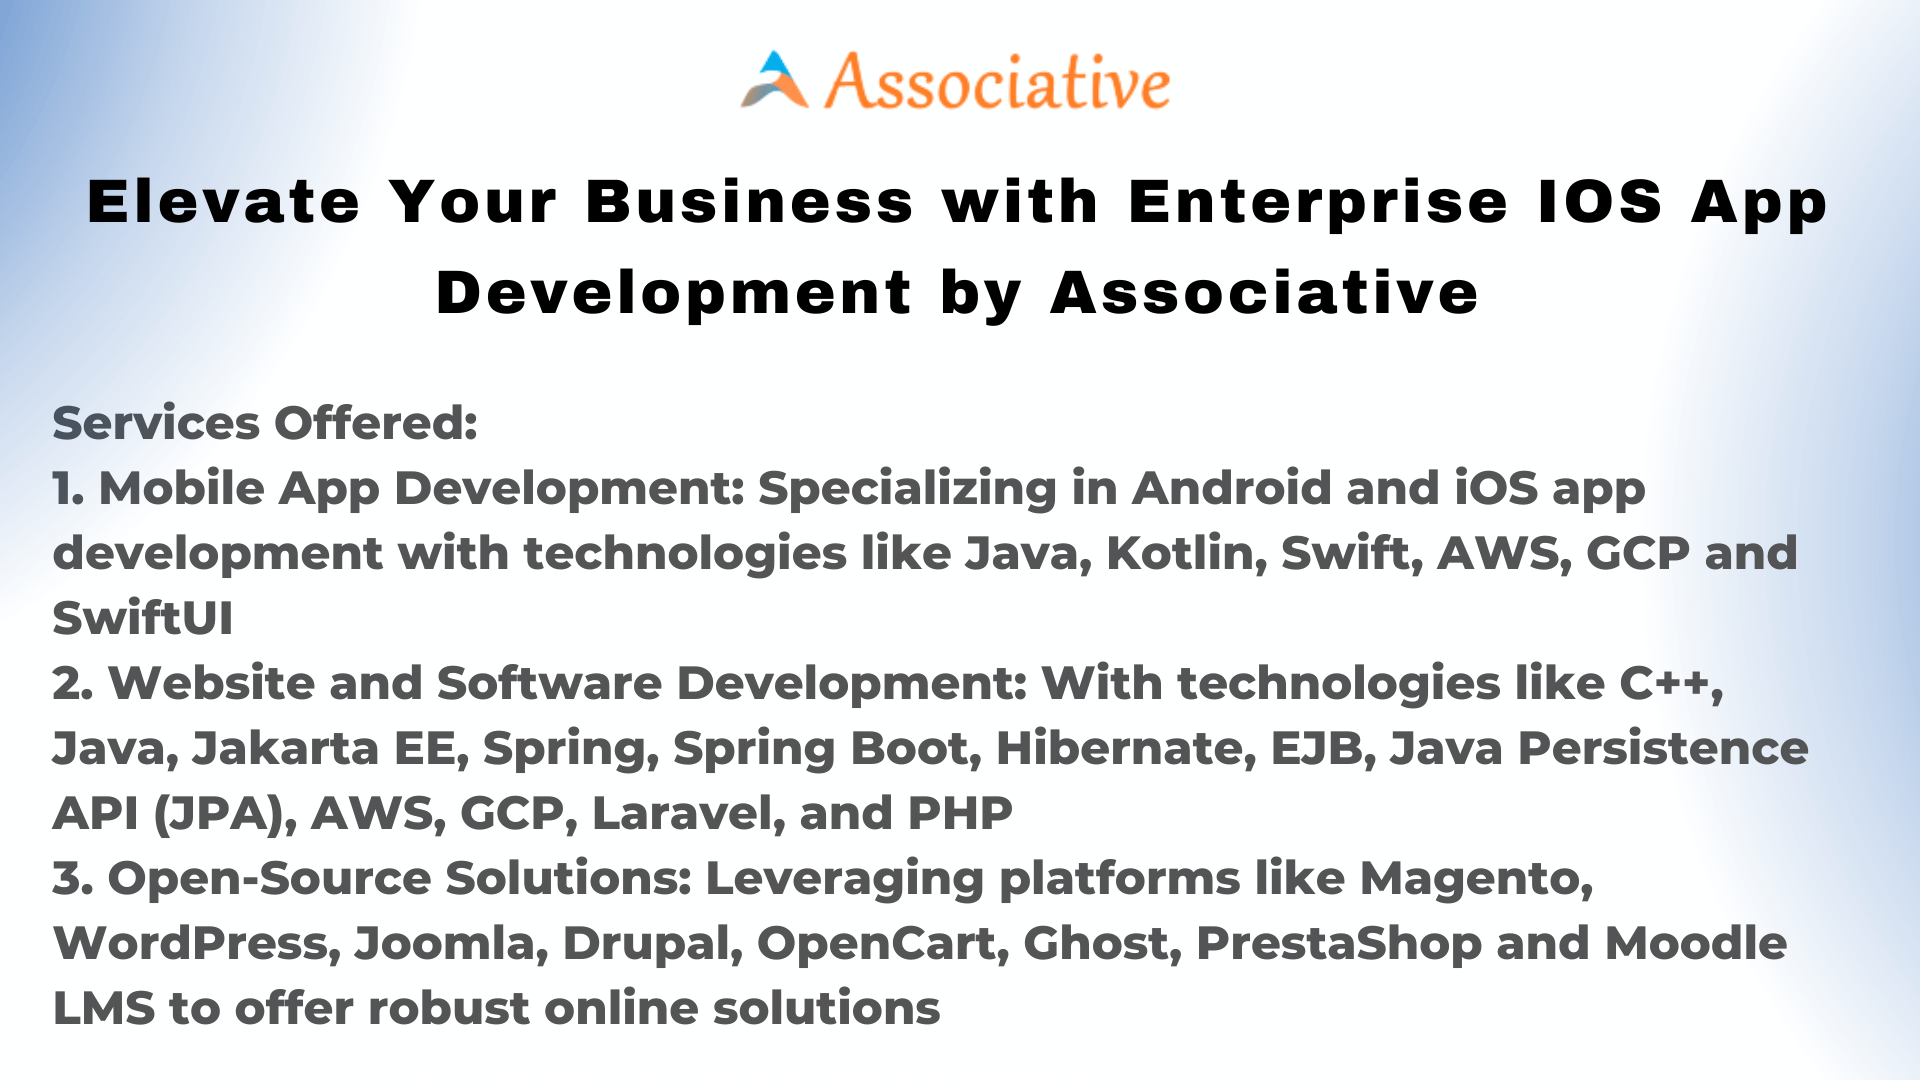 Elevate Your Business with Enterprise IOS App Development by Associative